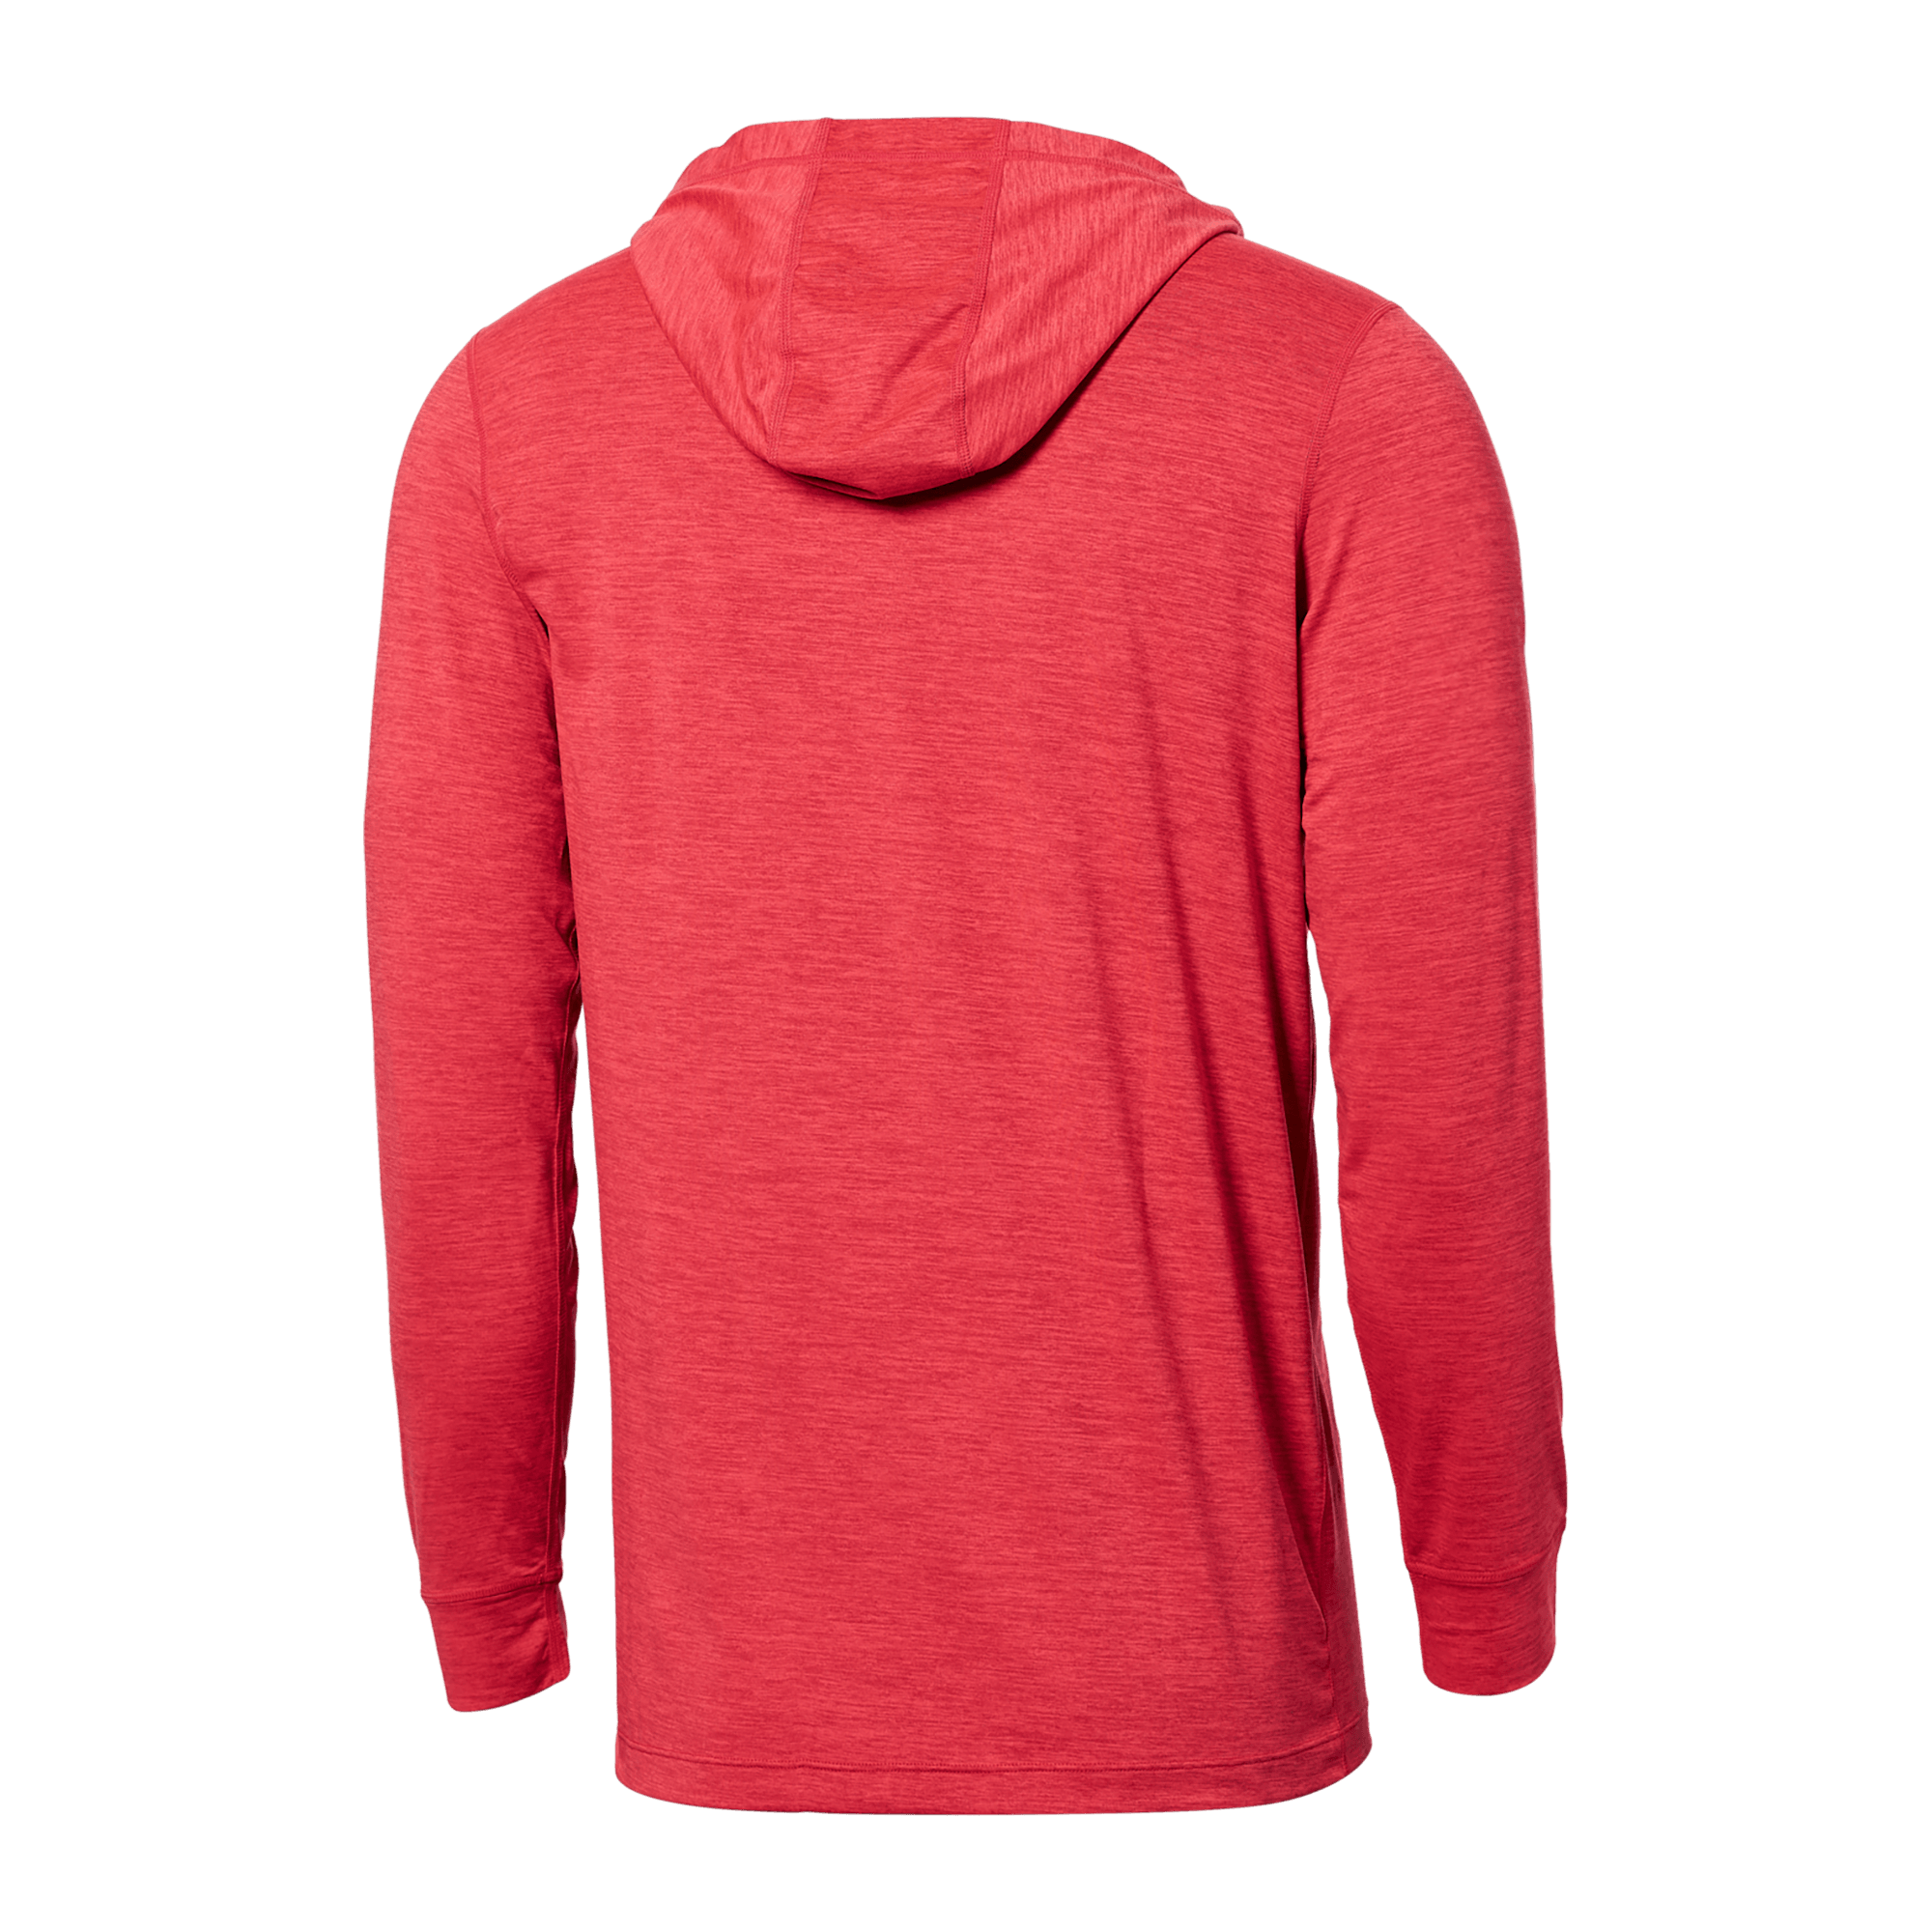 SAXX Men's DropTemp All Day Cooling Hoodie